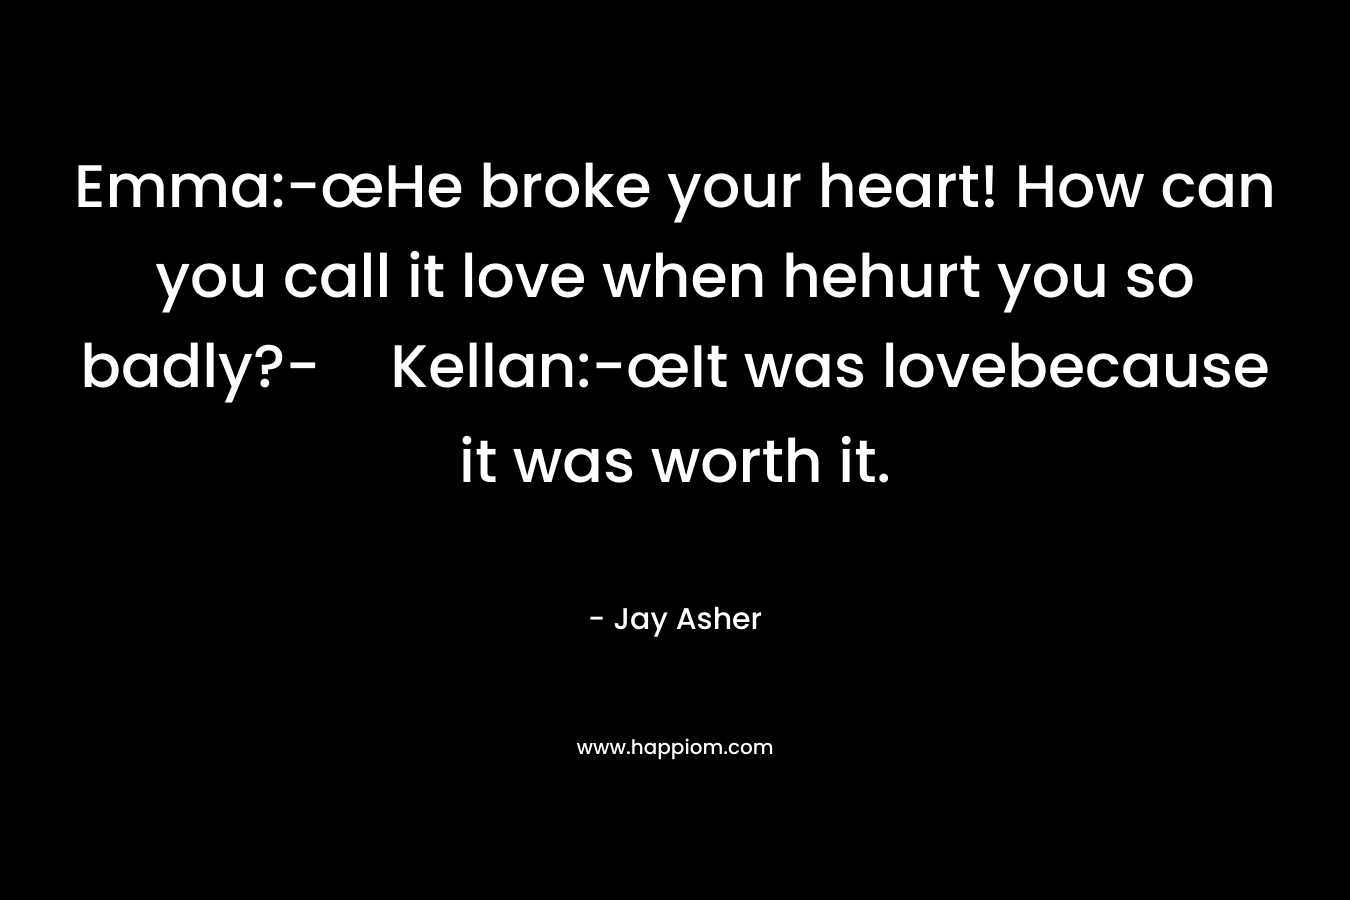 Emma:-œHe broke your heart! How can you call it love when hehurt you so badly?-Kellan:-œIt was lovebecause it was worth it. – Jay Asher